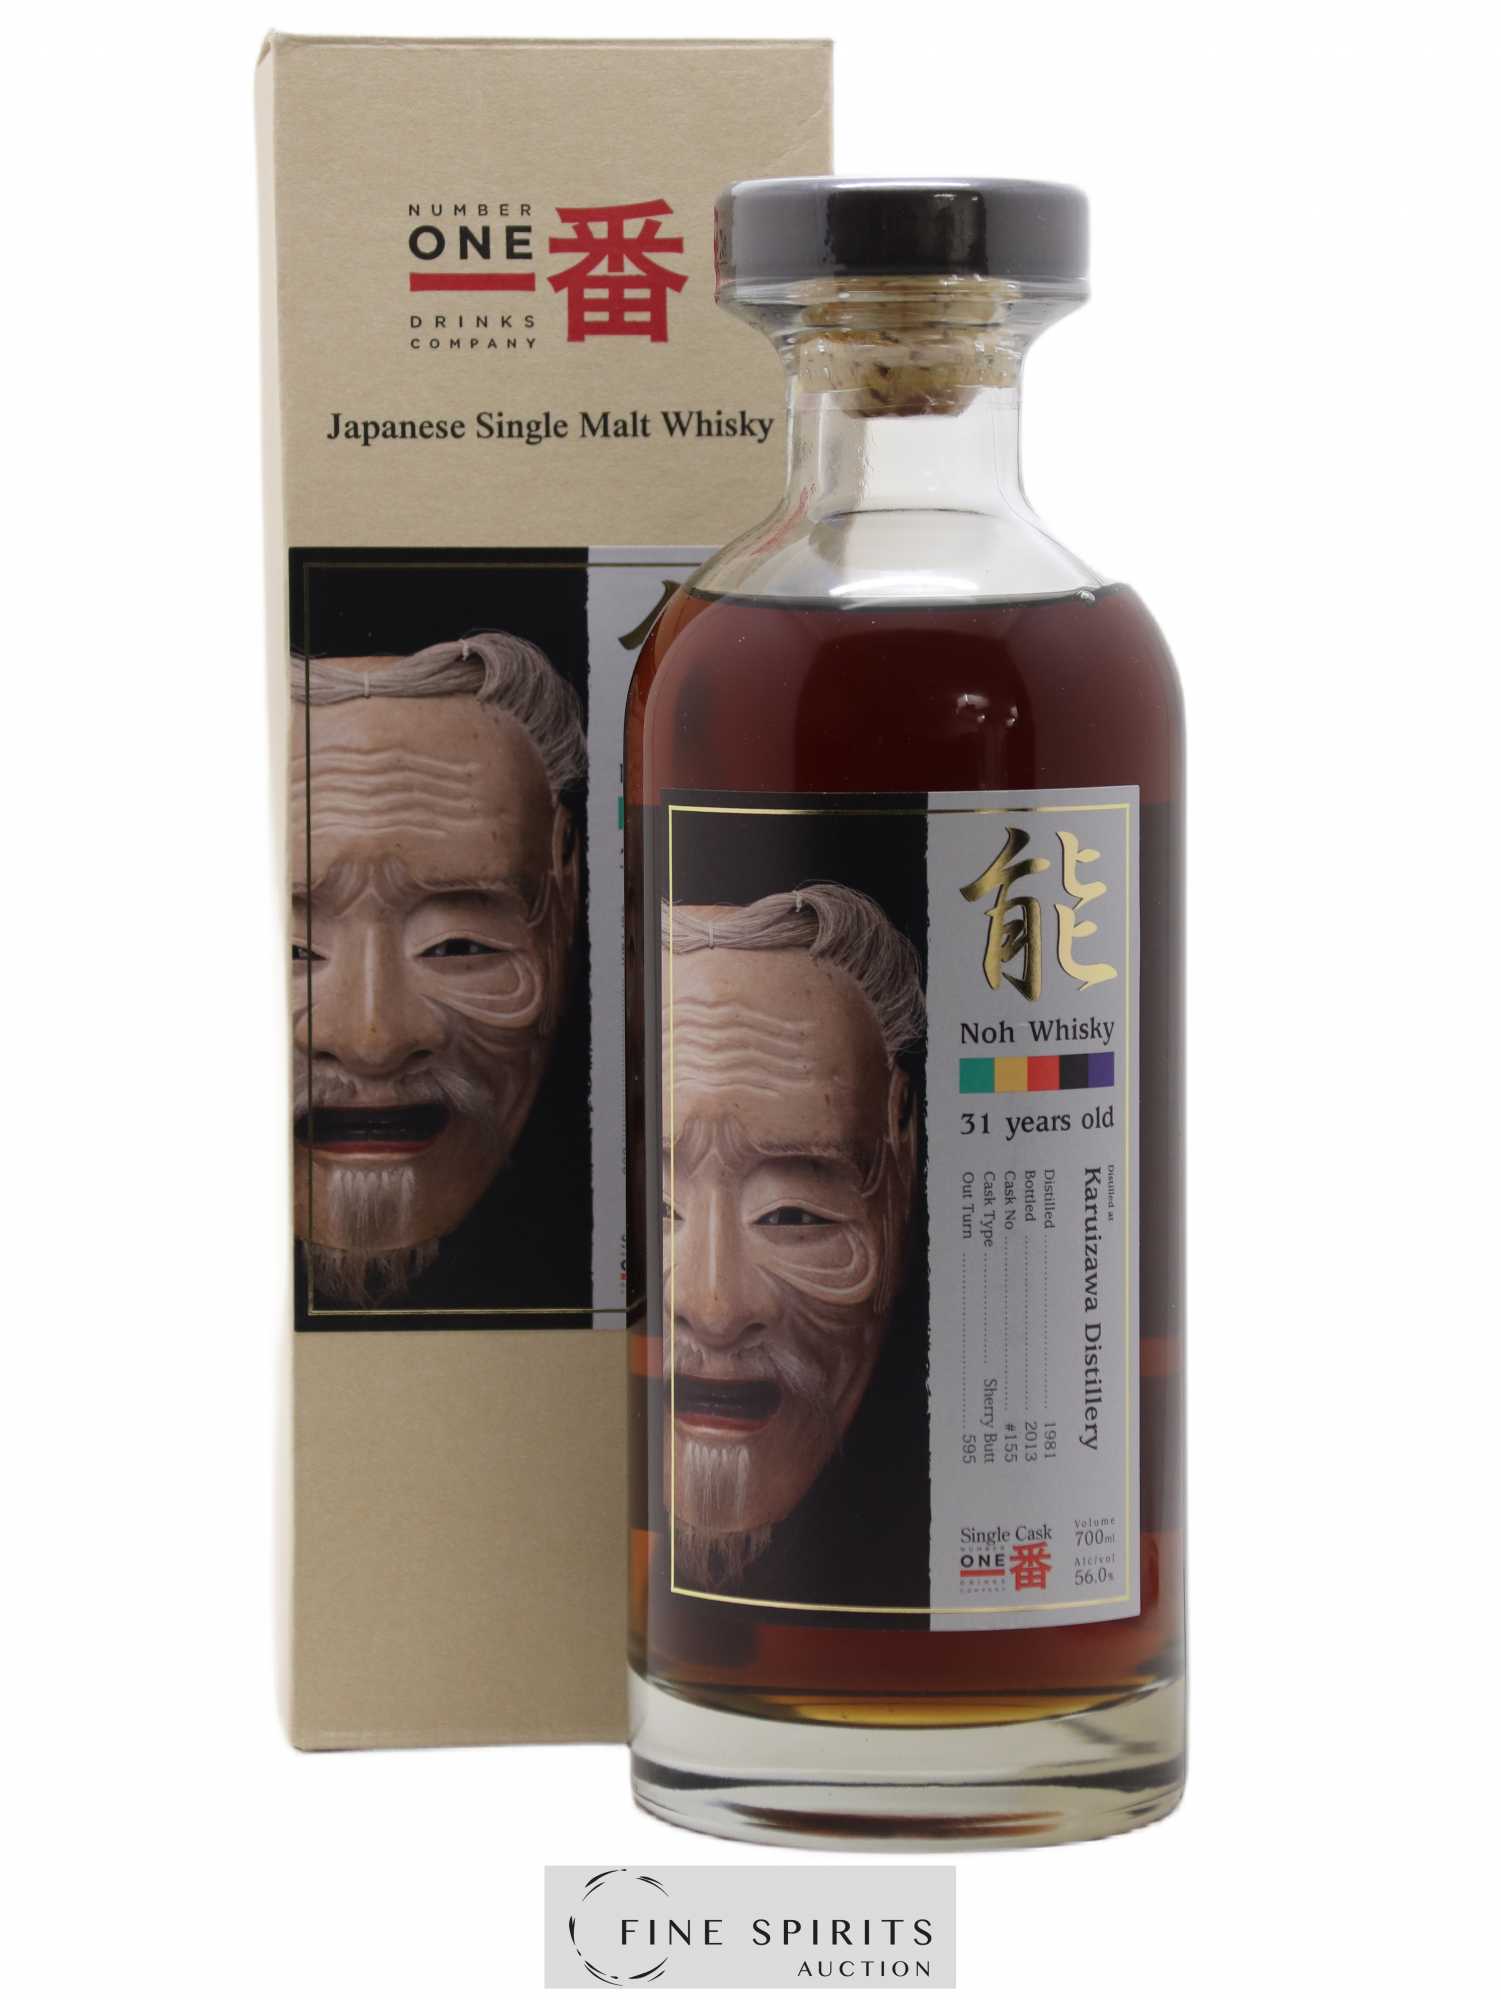 Karuizawa 31 years 1981 Number One Drinks Sherry Butt n°155 - One of 595 - bottled 2013 Noh Label 